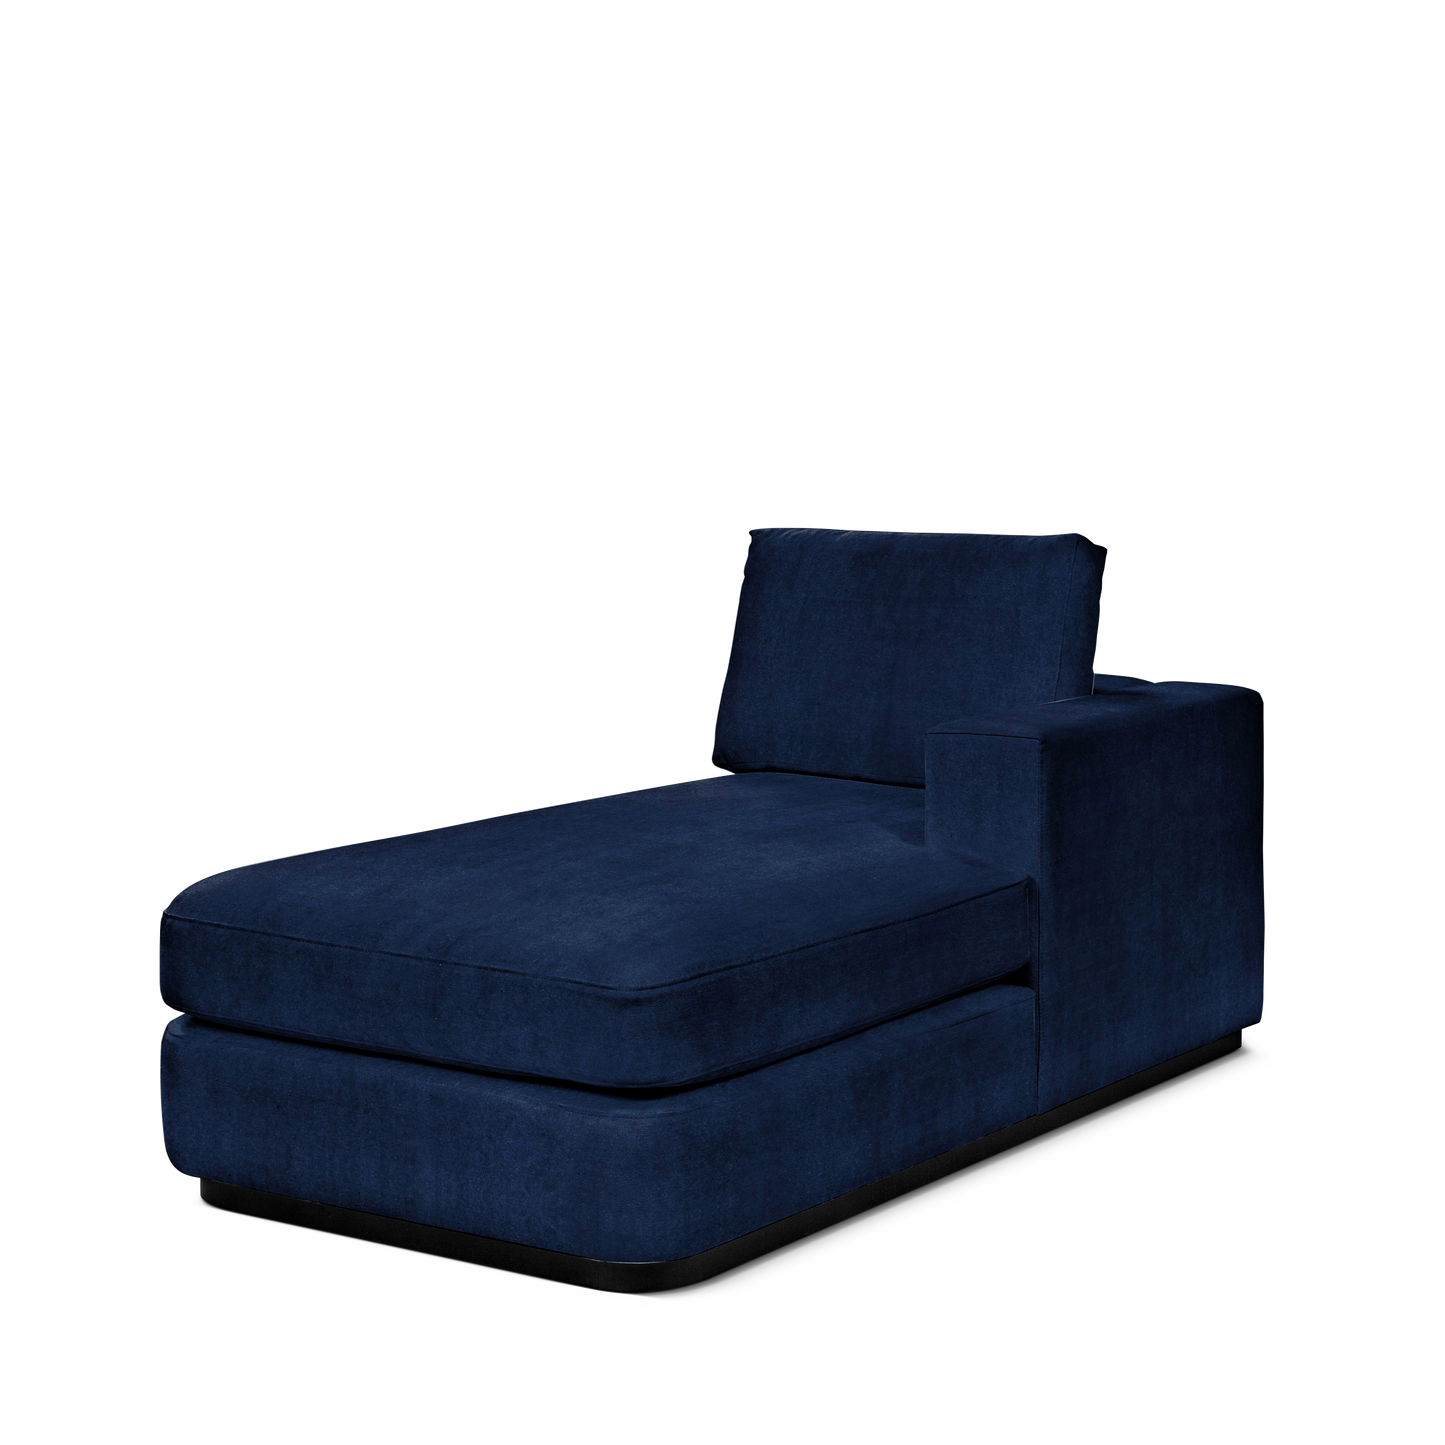 ATLAS 90 Lounge Bed arm rest right with London dark blue textile